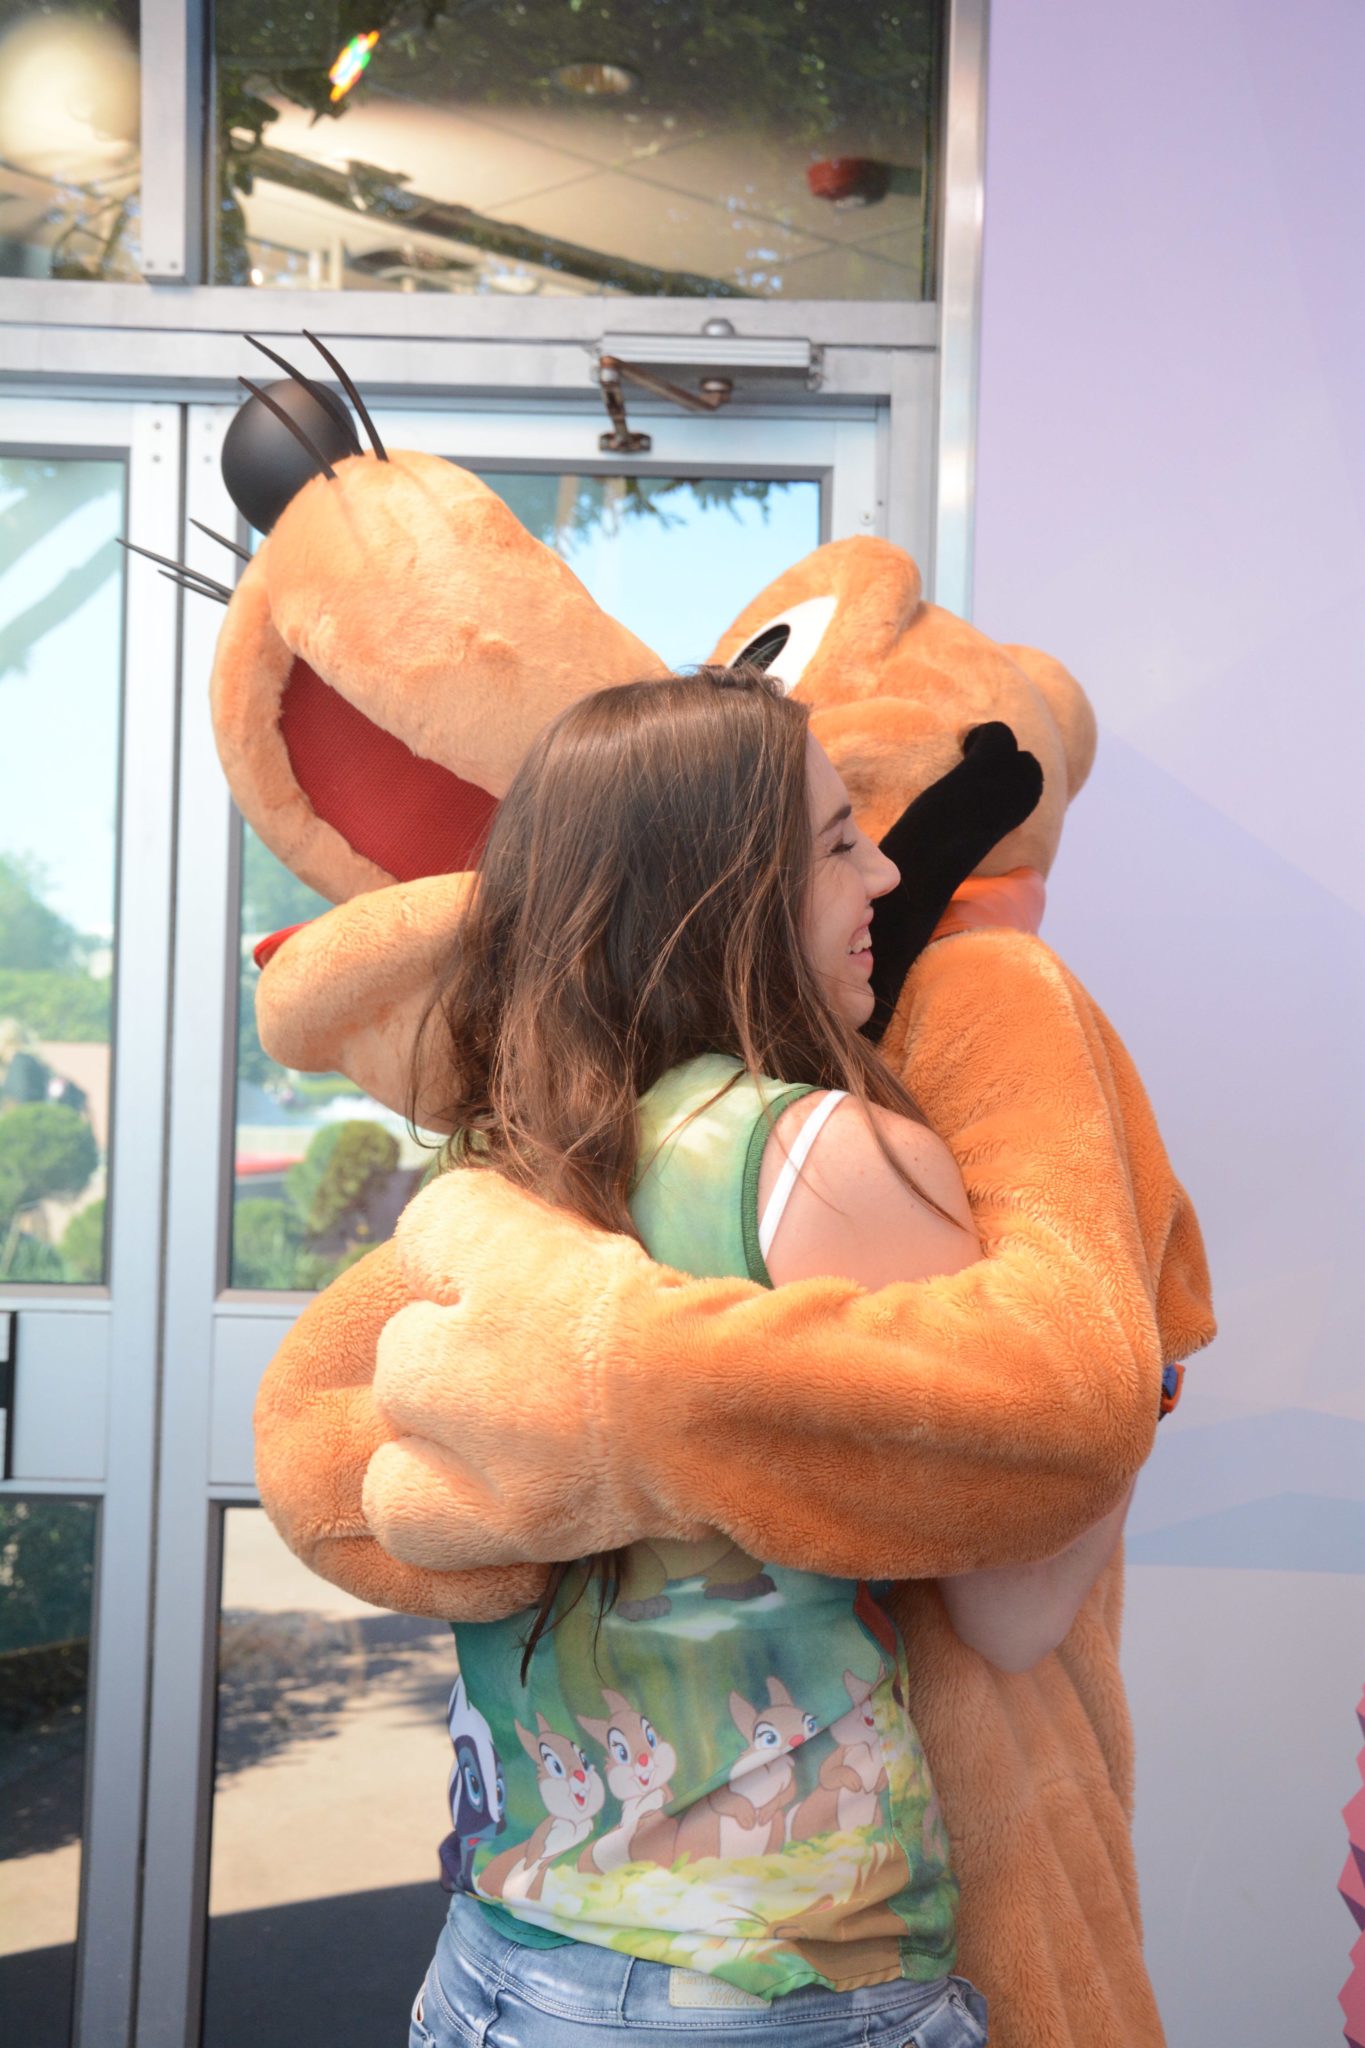 Chelsea gets a big hug from Pluto at the Visa Photo Spot.